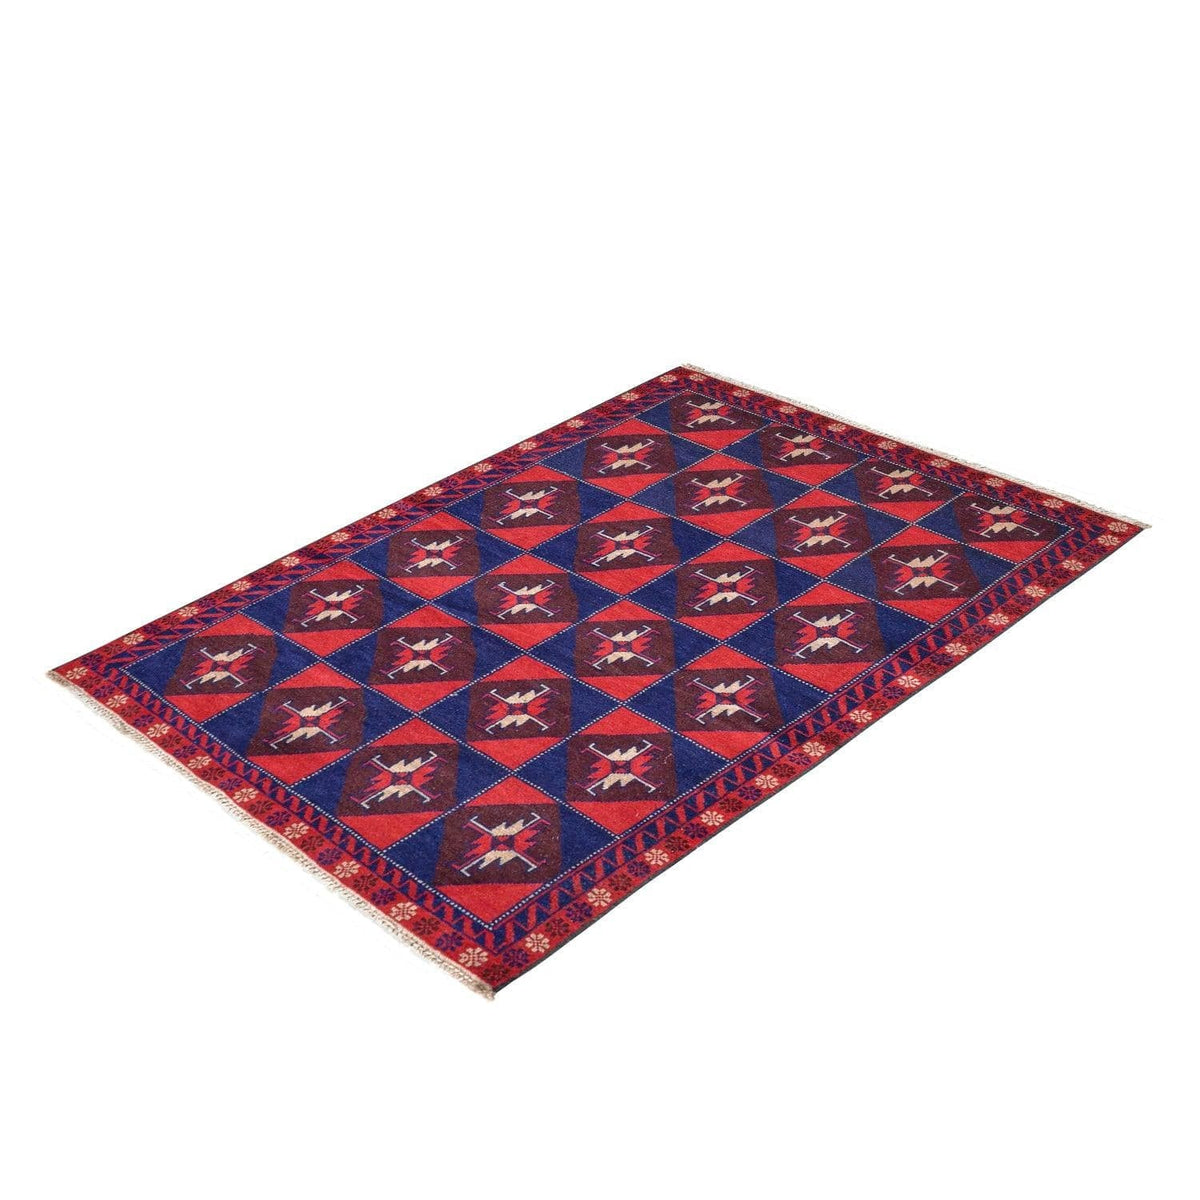 Hand-knotted Wool Persian Baluchi Rug 110cm x 183cm